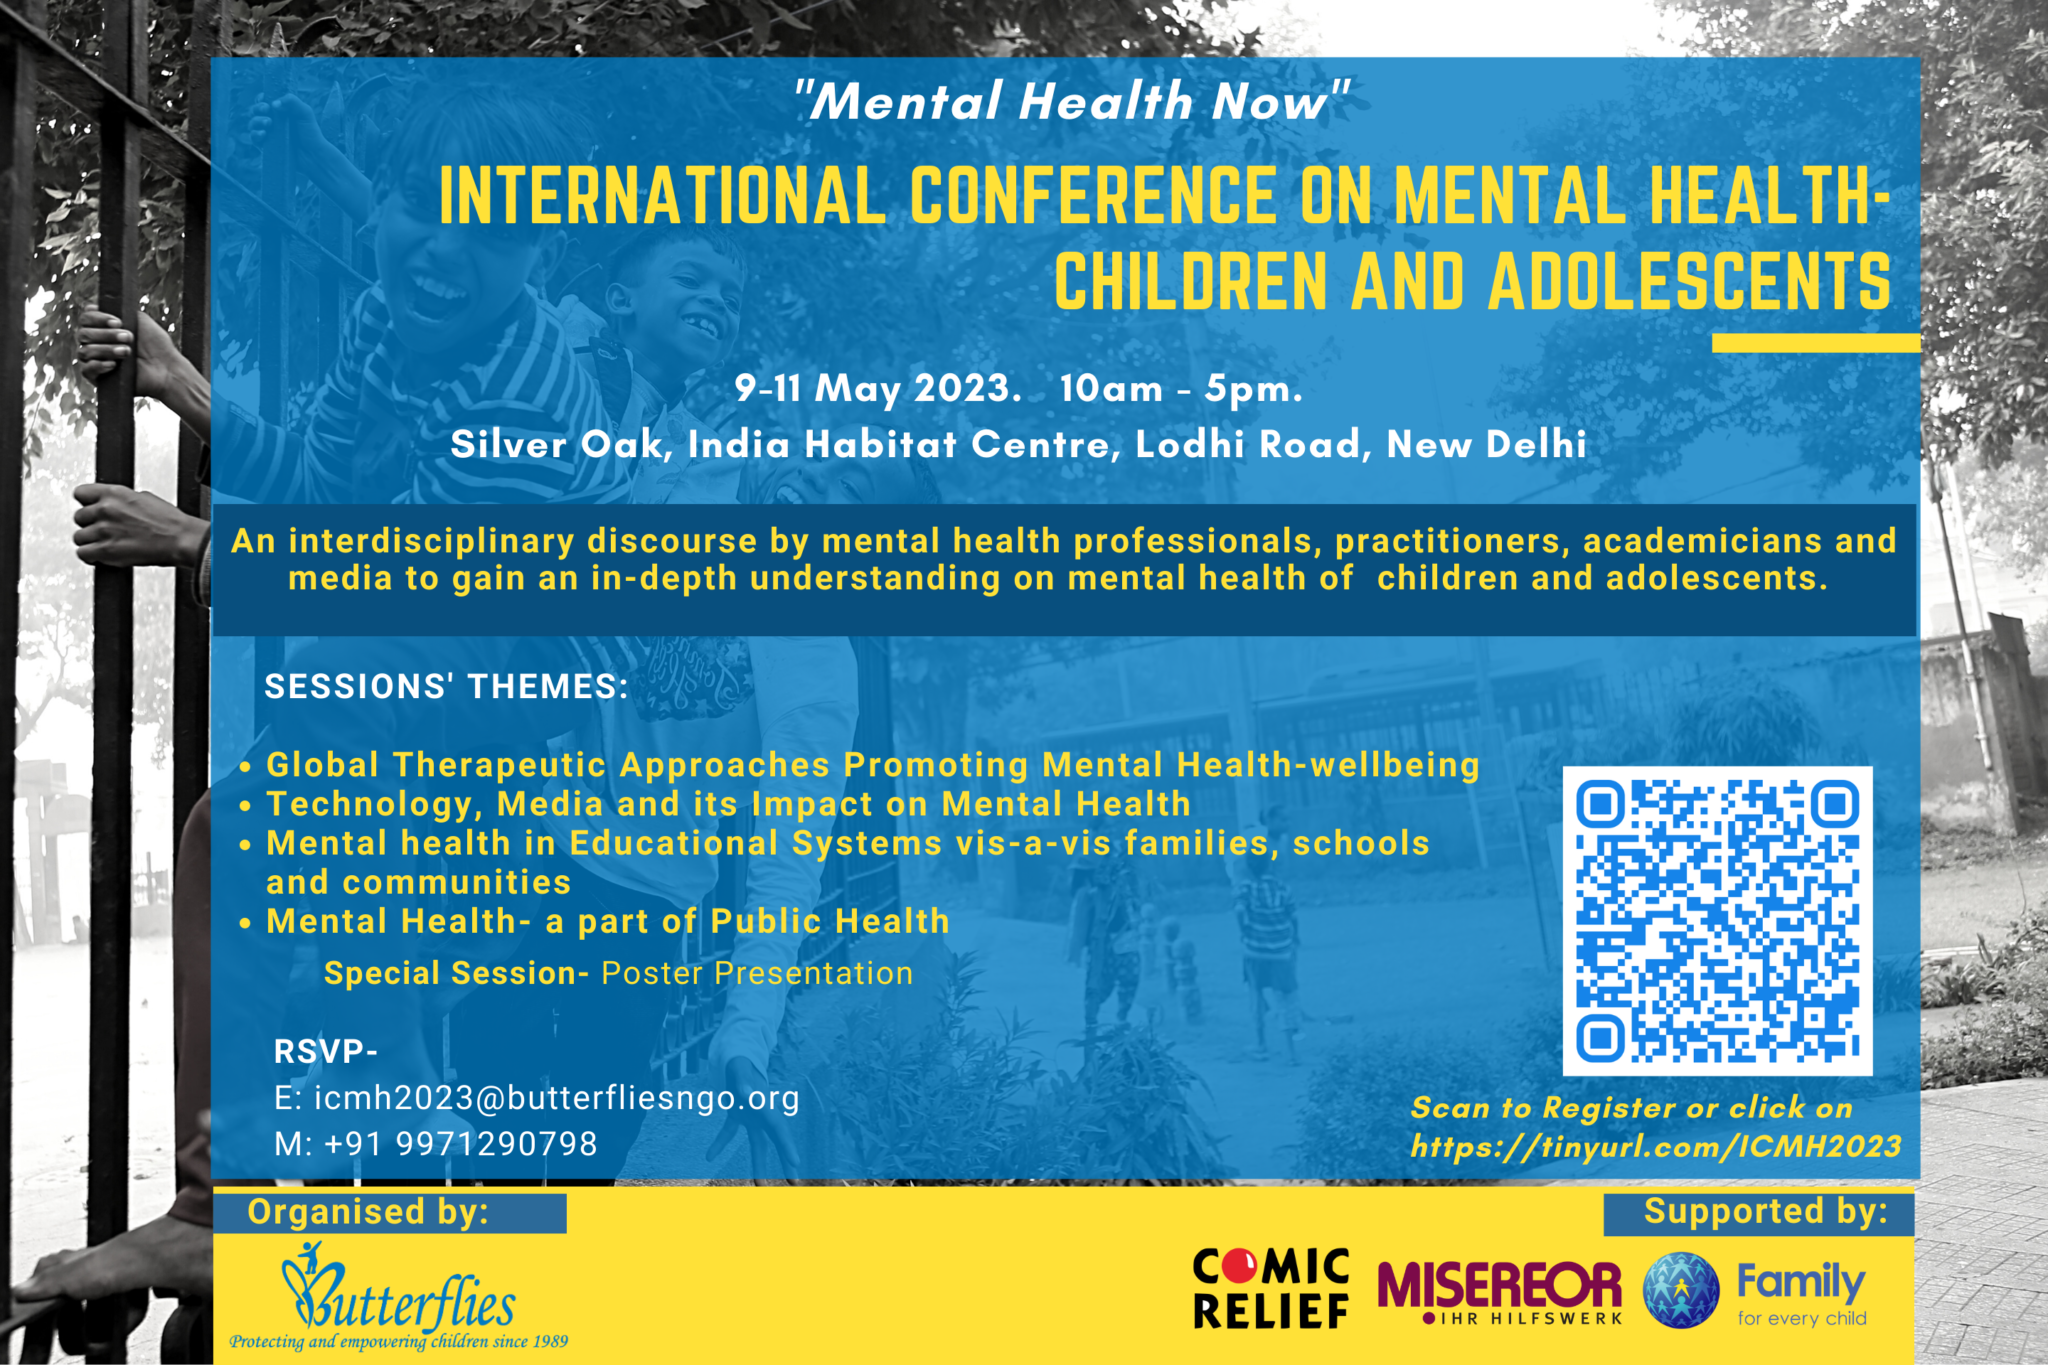 The International Conference on Mental Health